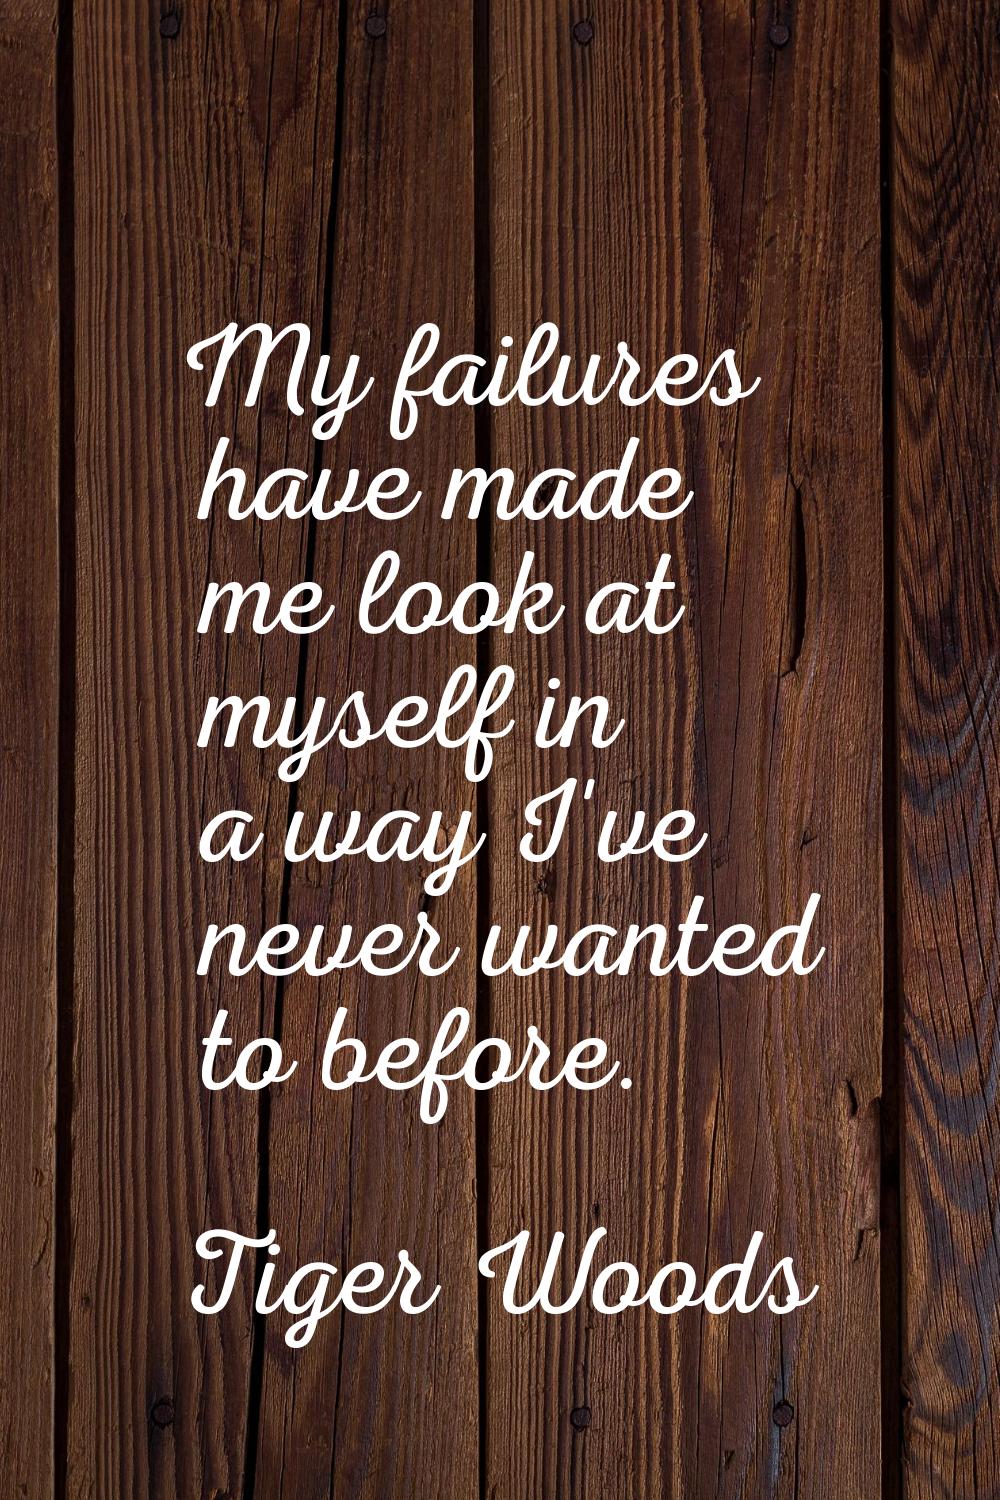 My failures have made me look at myself in a way I've never wanted to before.